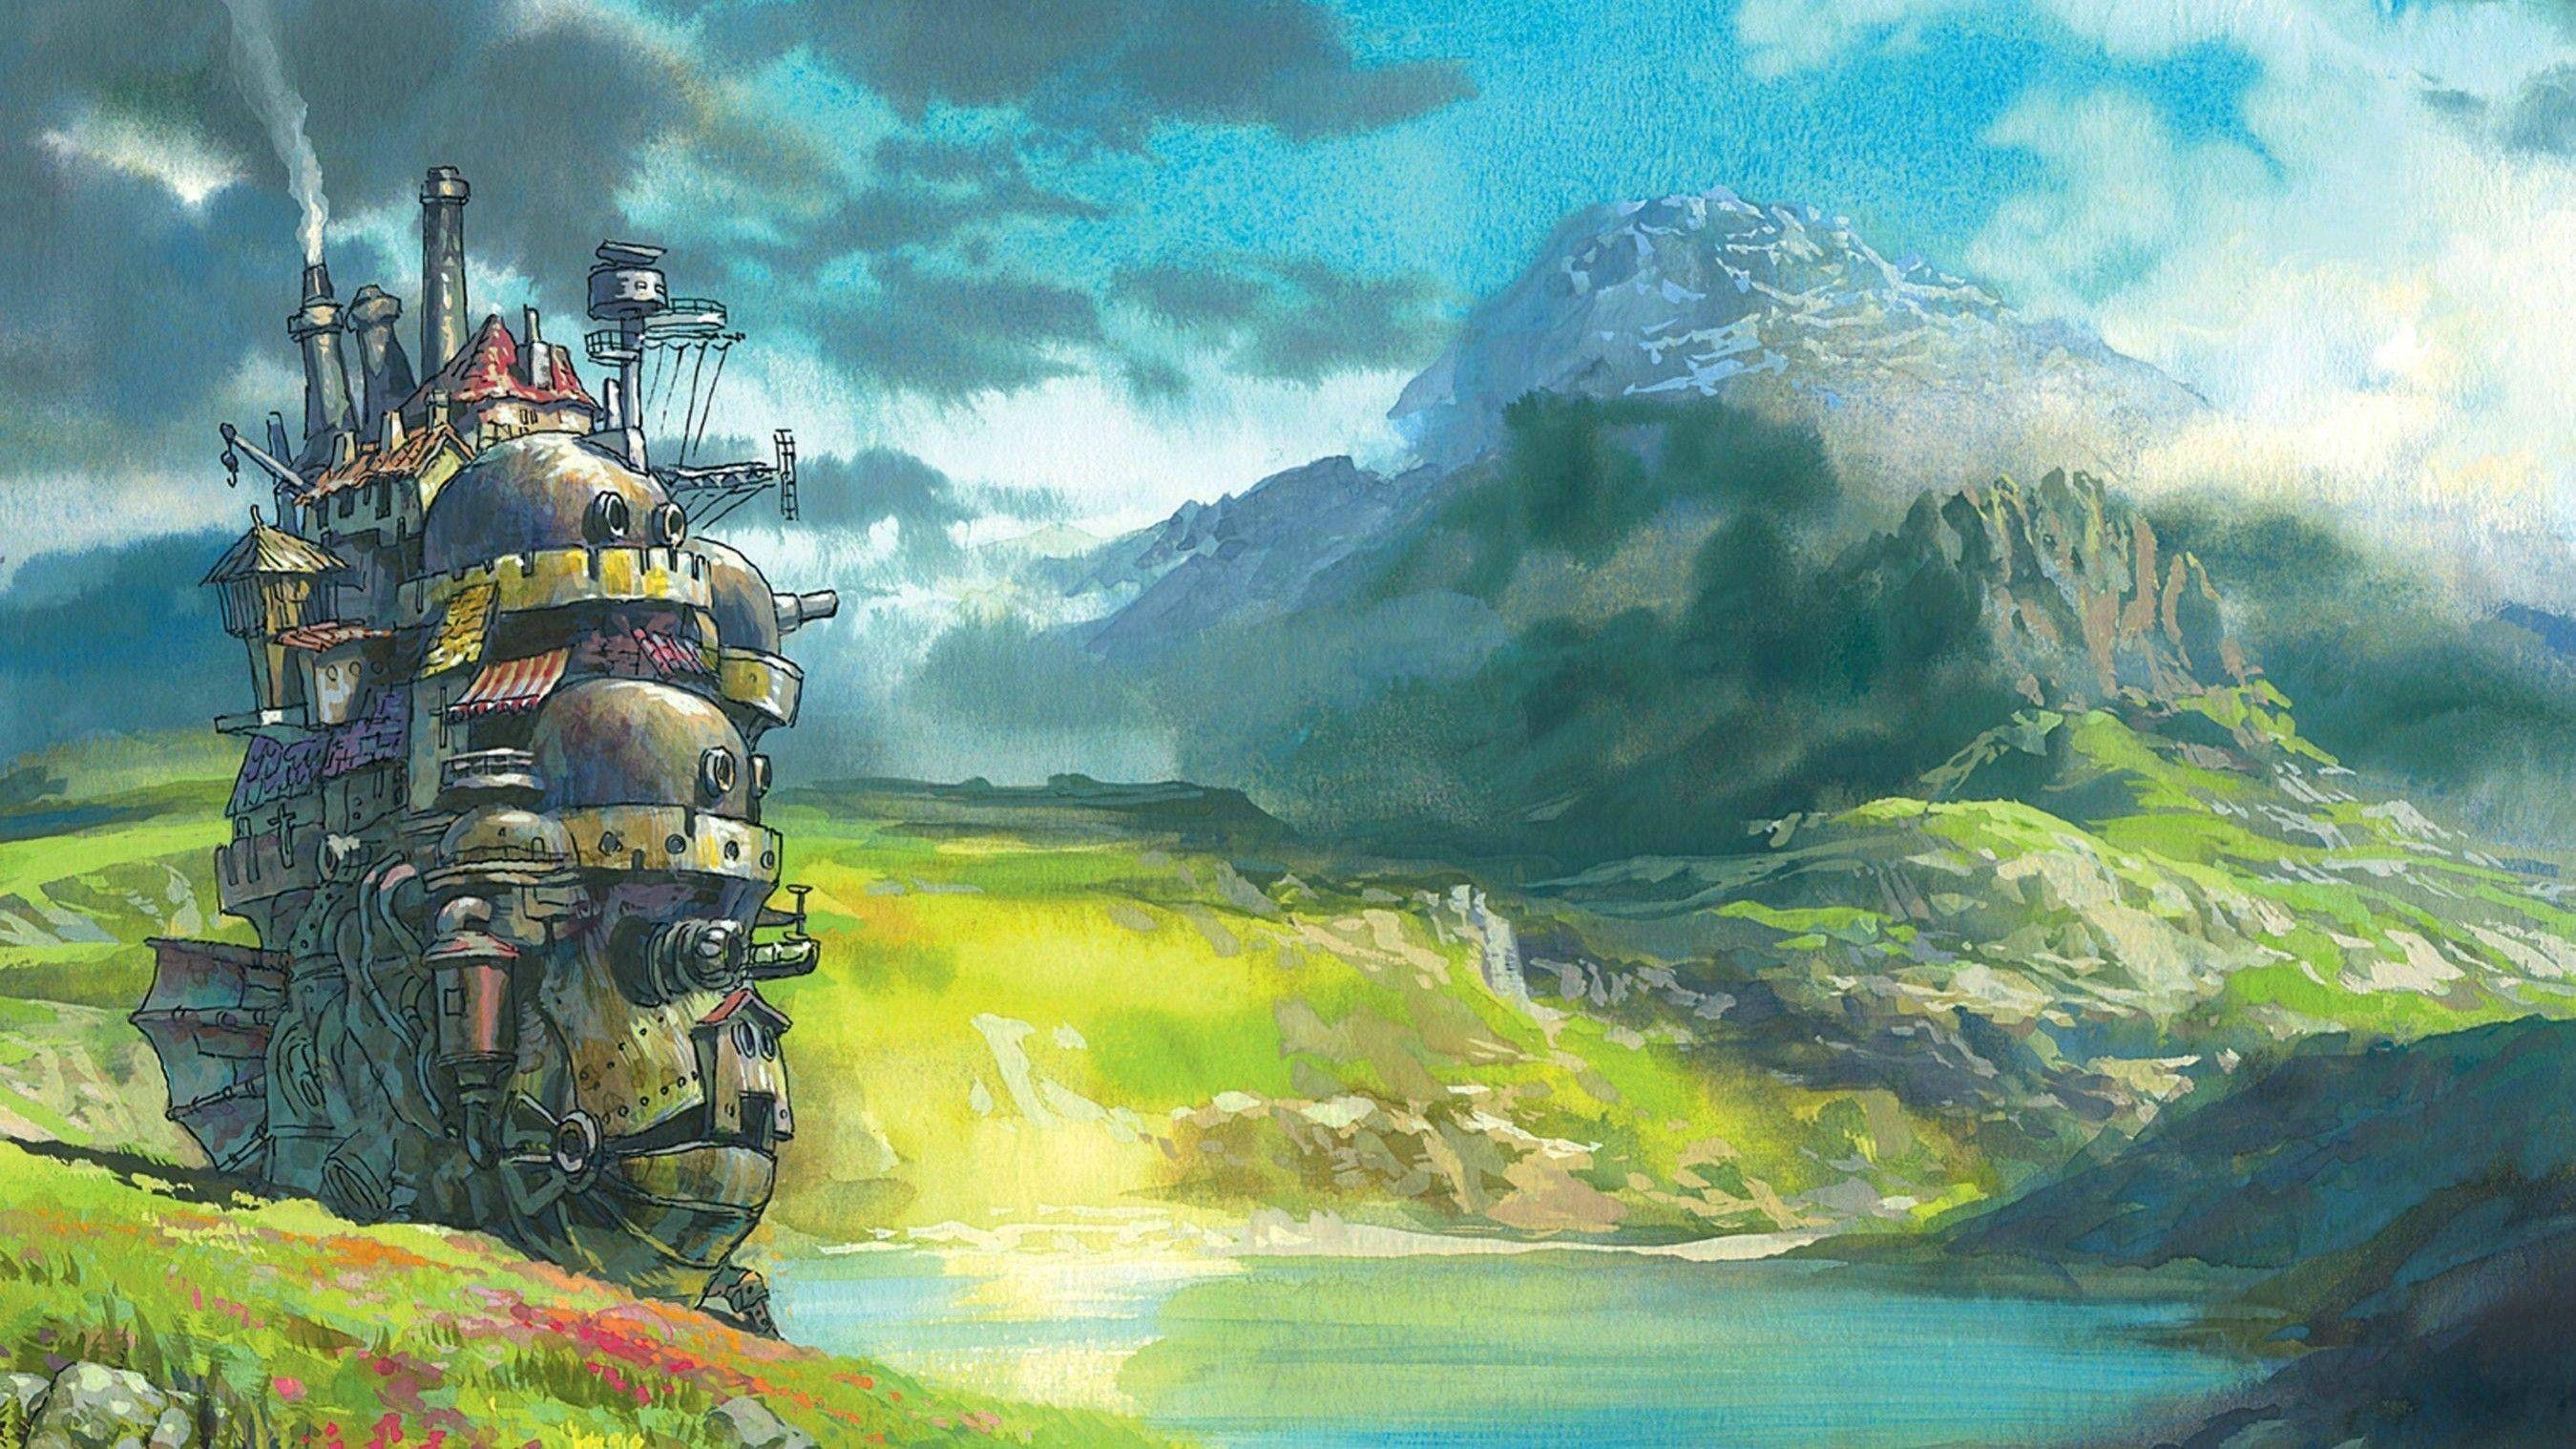 howls moving castle movie online free